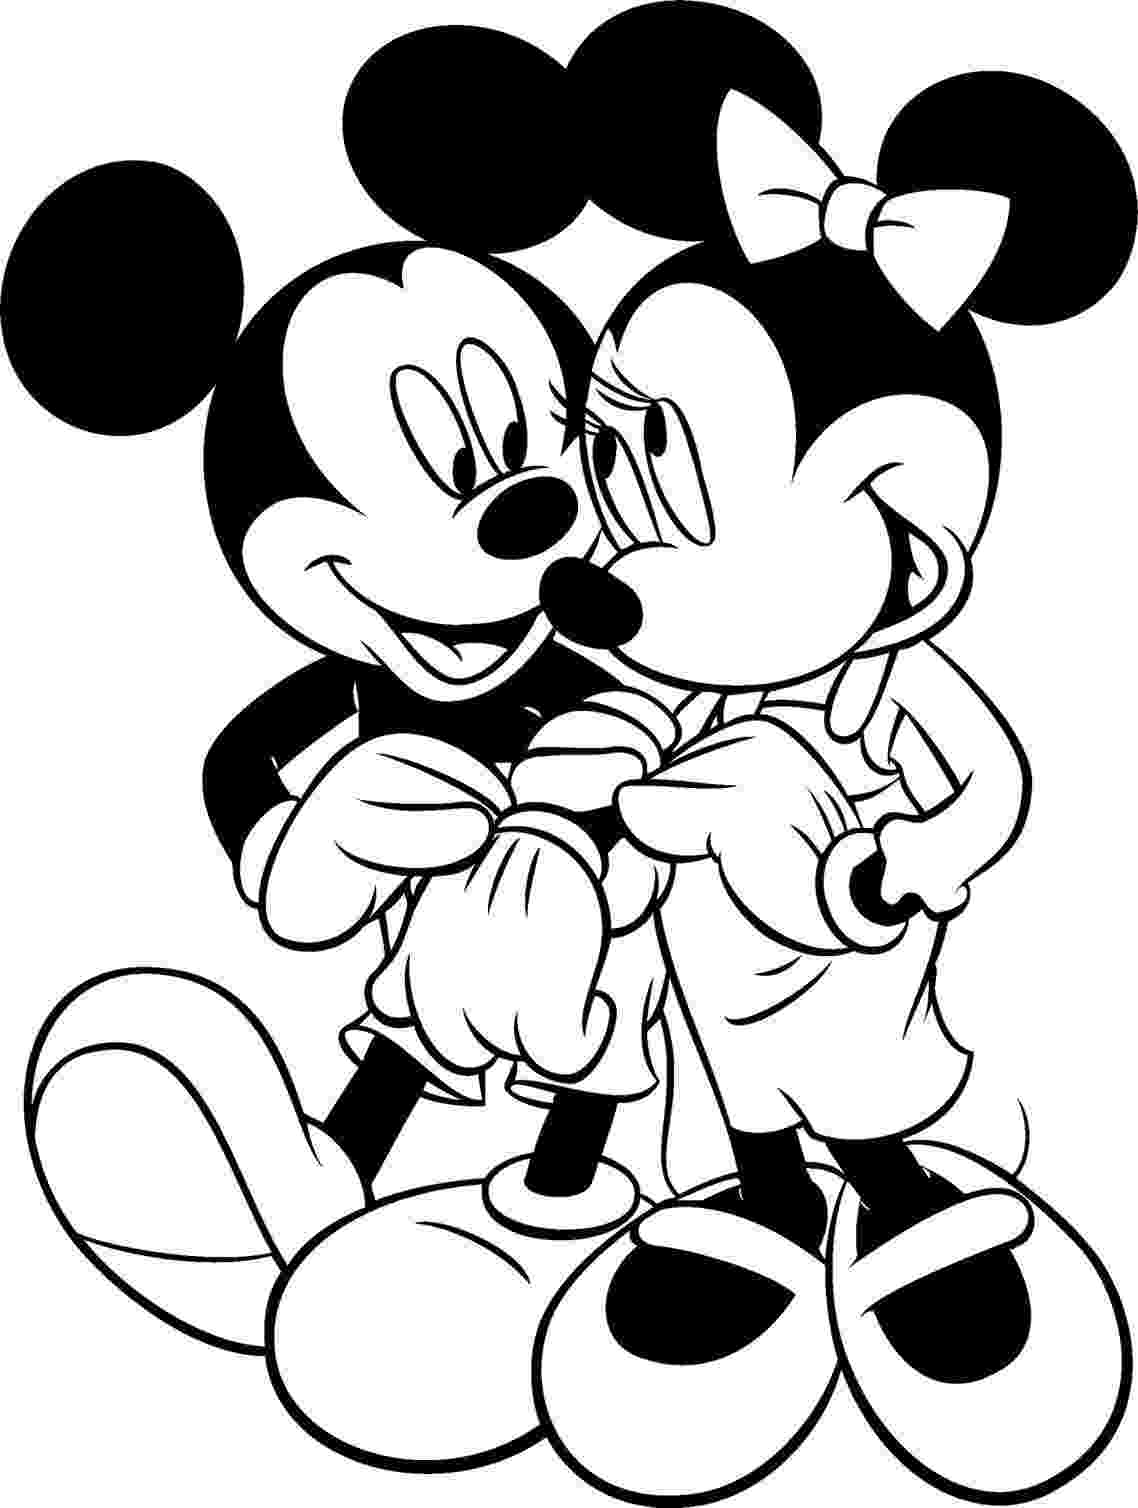 black and white pictures of mickey mouse mickey mouse black and white clipart panda free pictures and mouse of black white mickey 